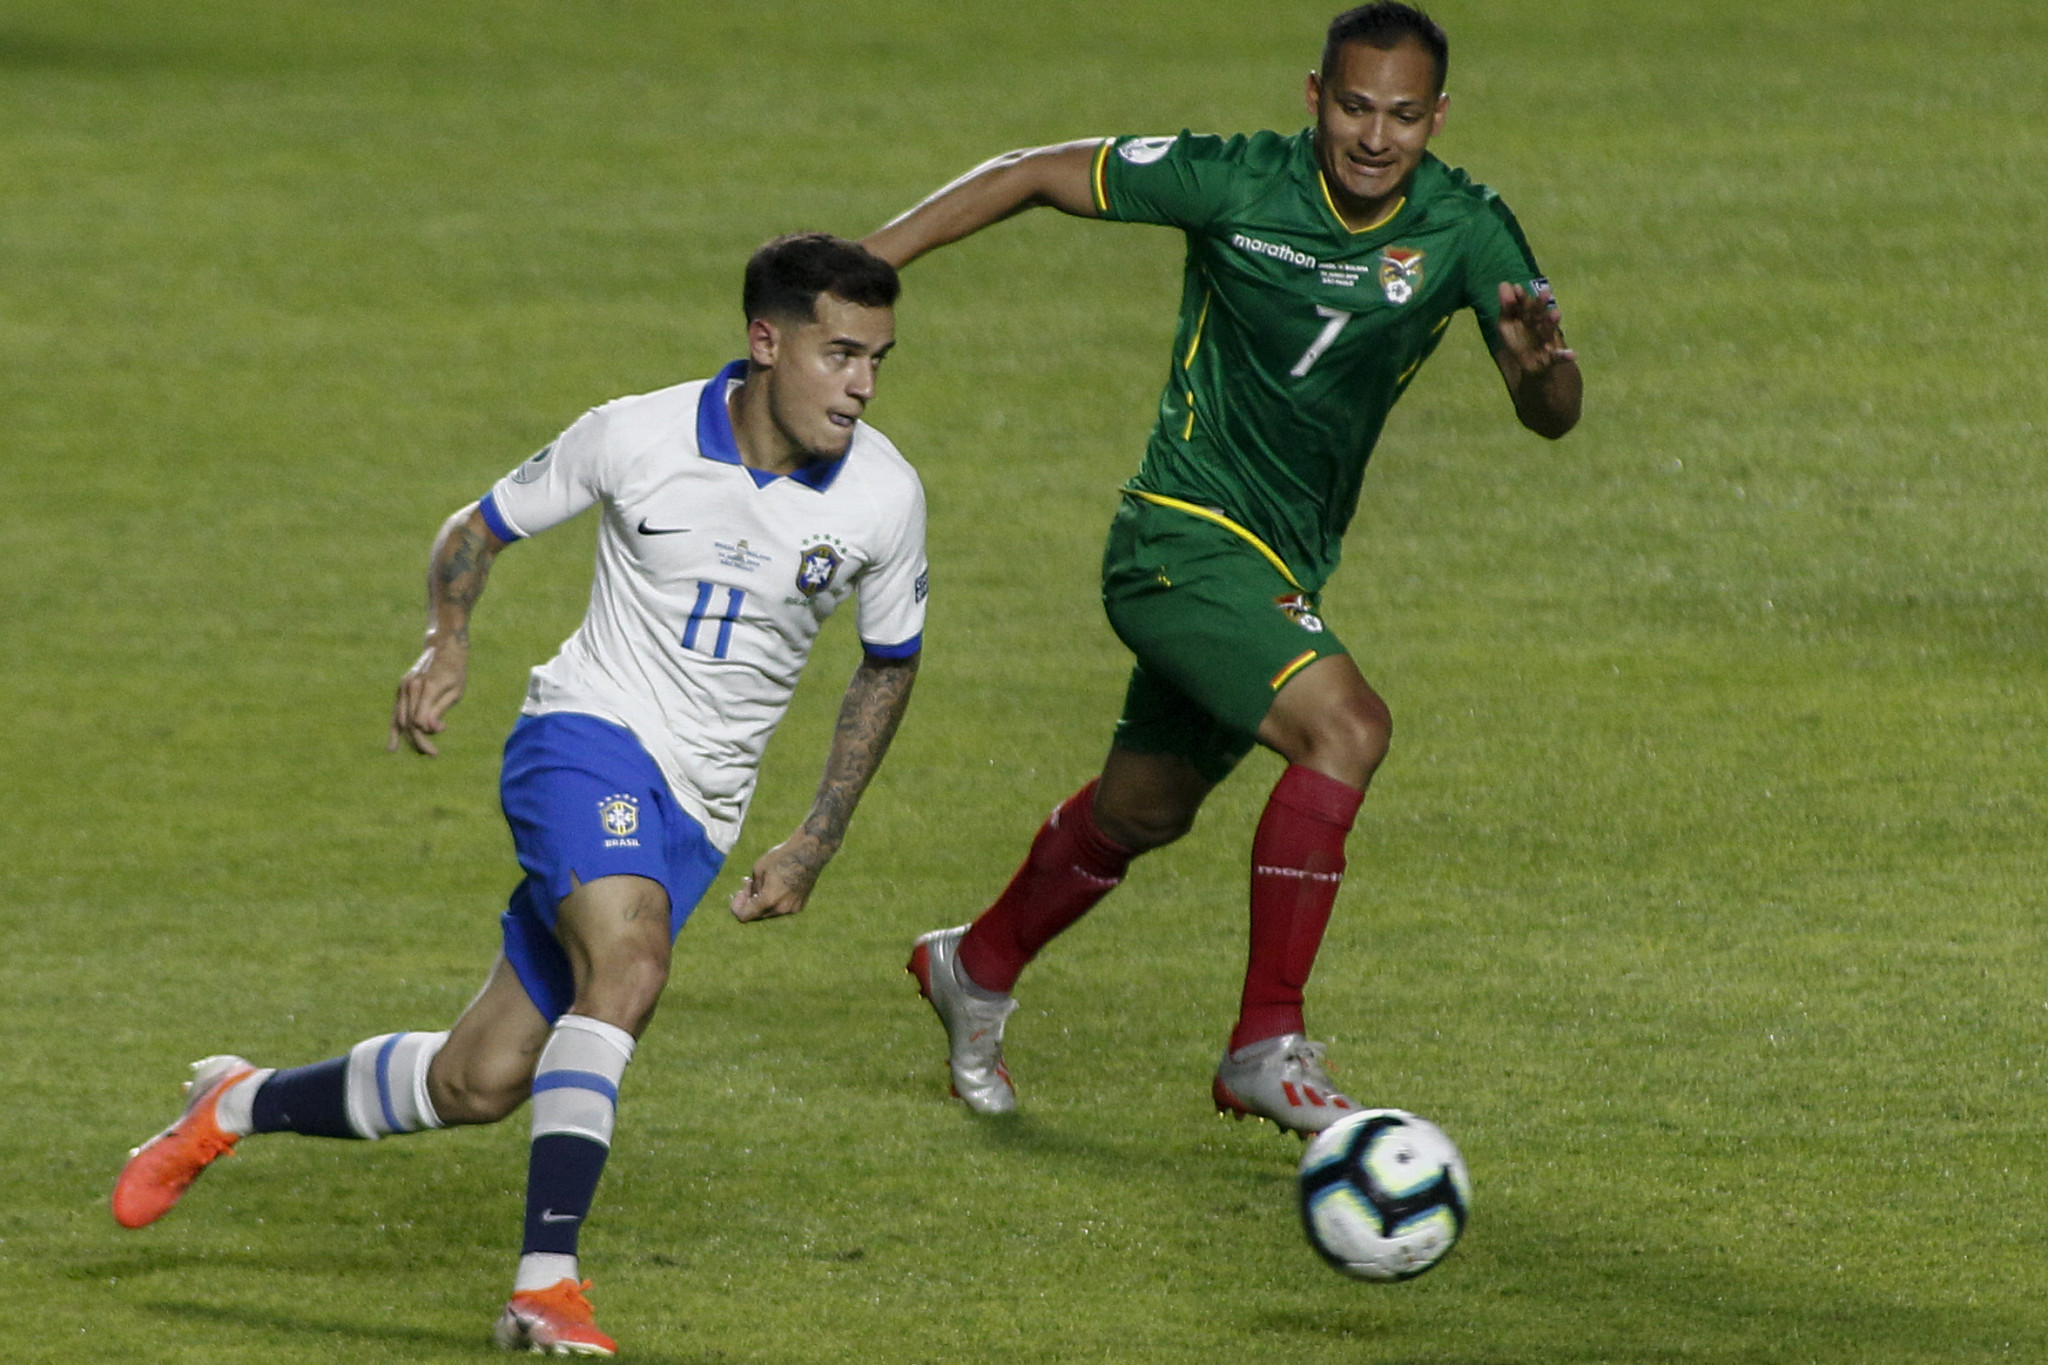 Hosts Brazil live up to expectations with comfortable opening Copa América victory against Bolivia